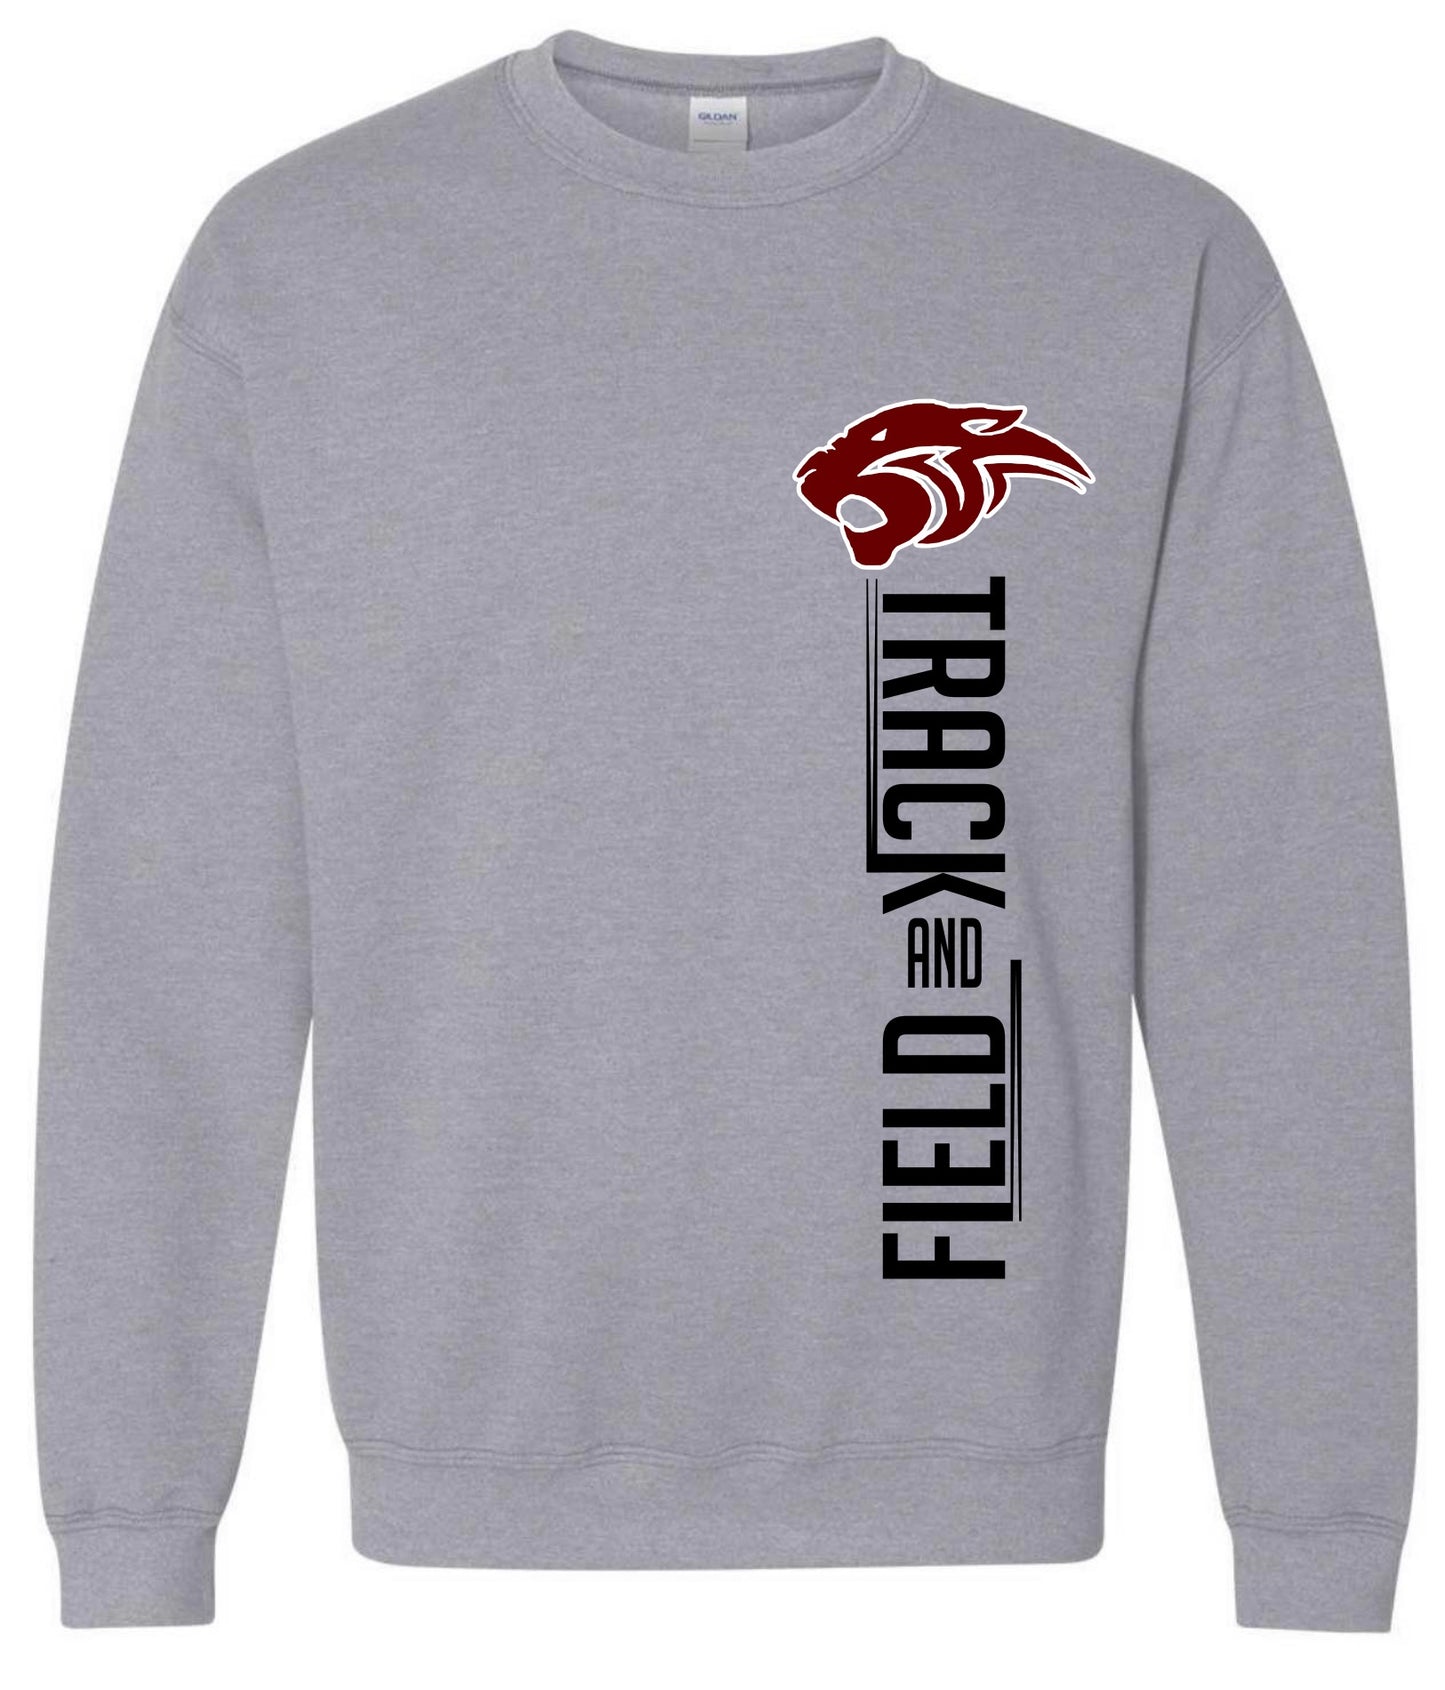 Panthers Track and Field Sweatshirt